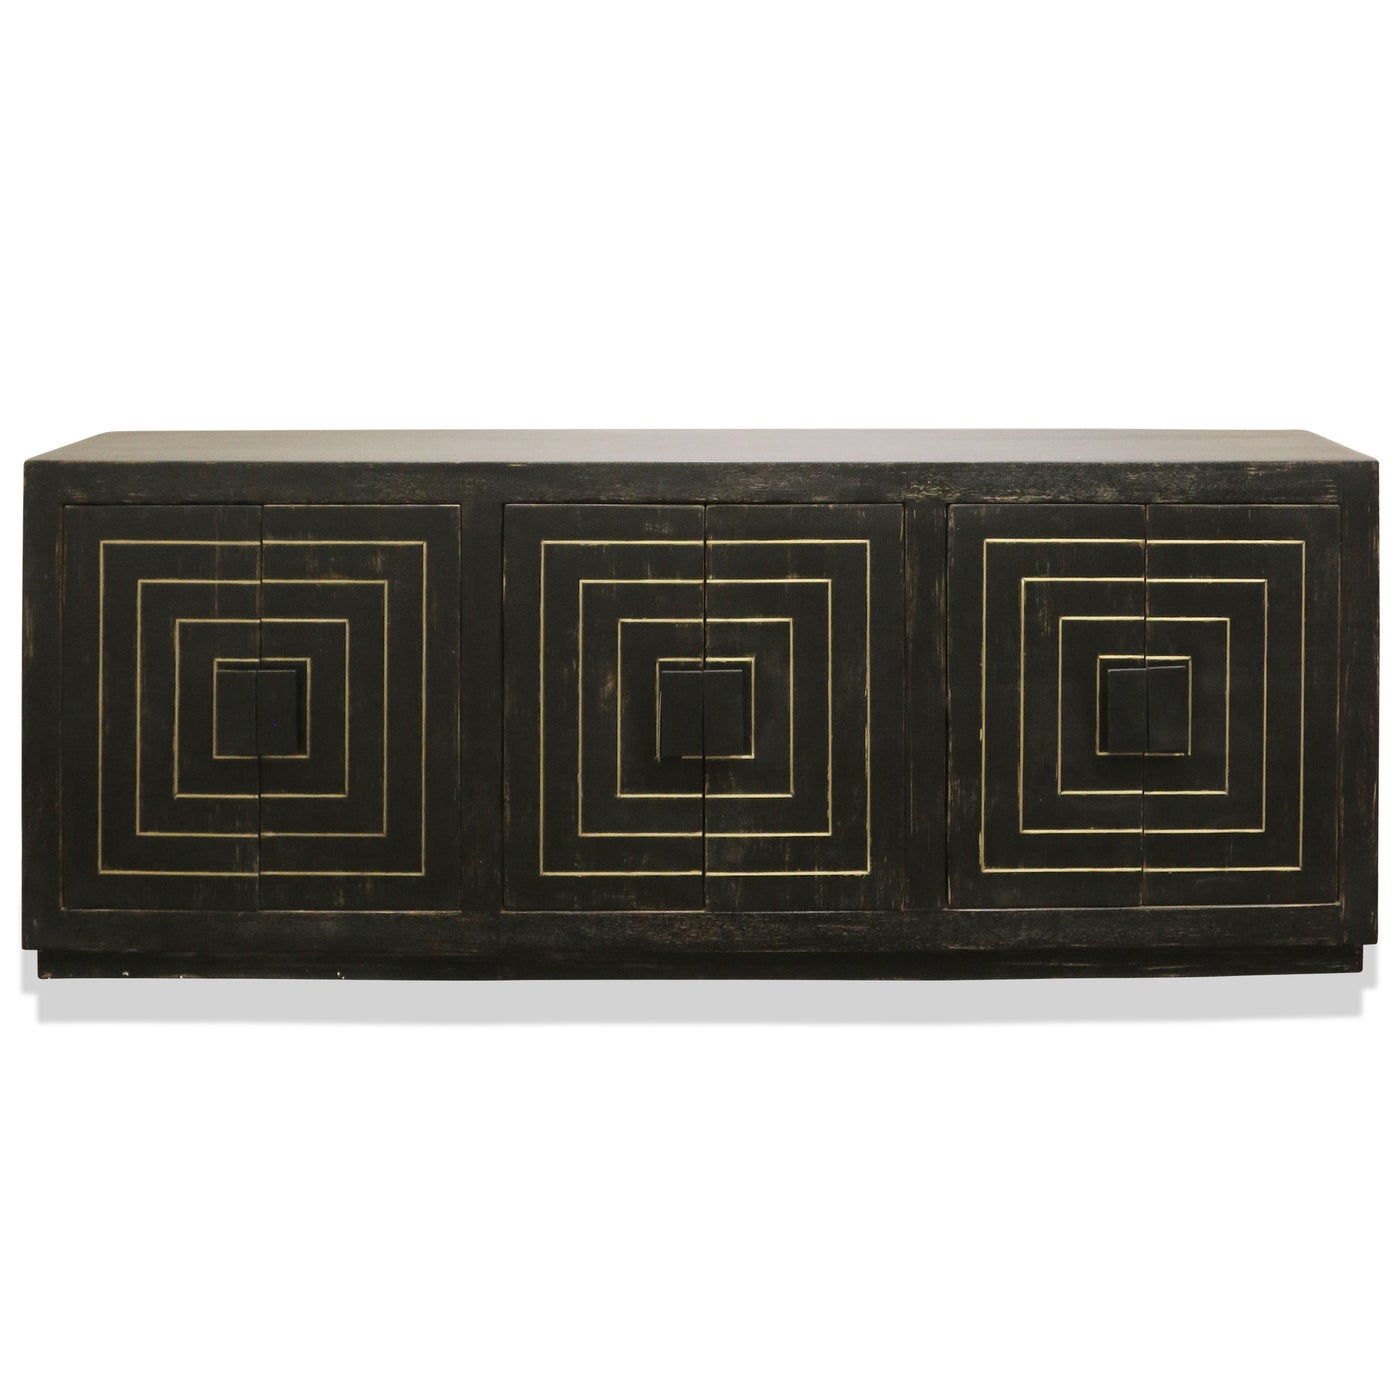 BRITTON SIDEBOARD | Solid Mango Wood With Black Brushed Finish | Six Doors